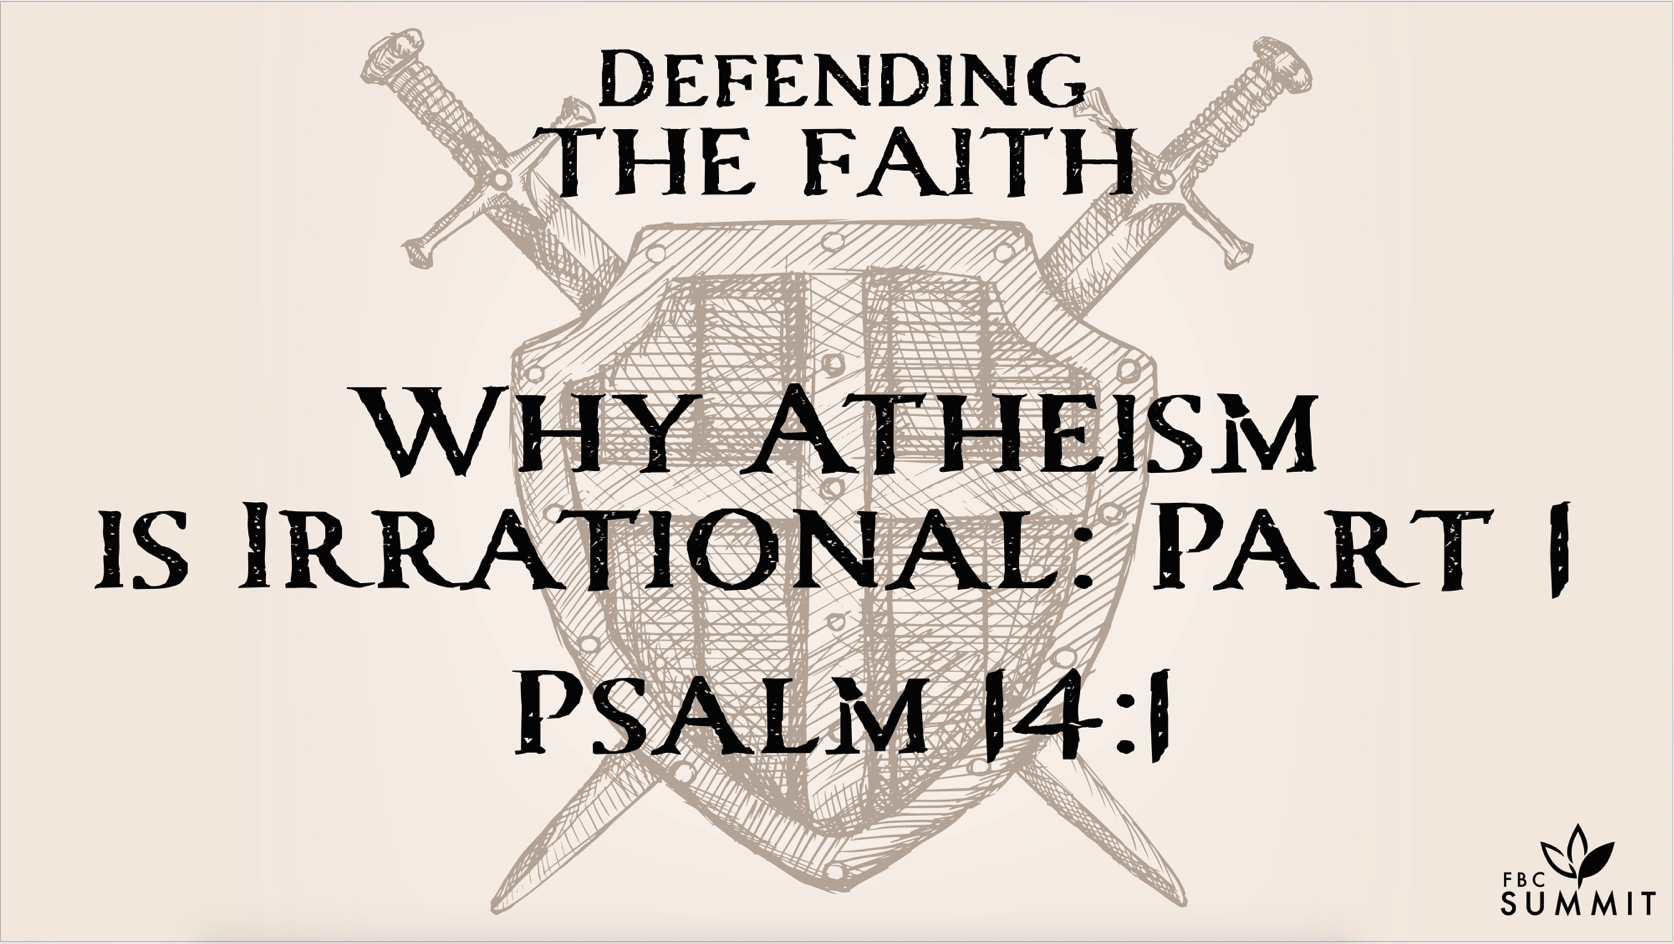 "Why Atheism is Irrational" Part I